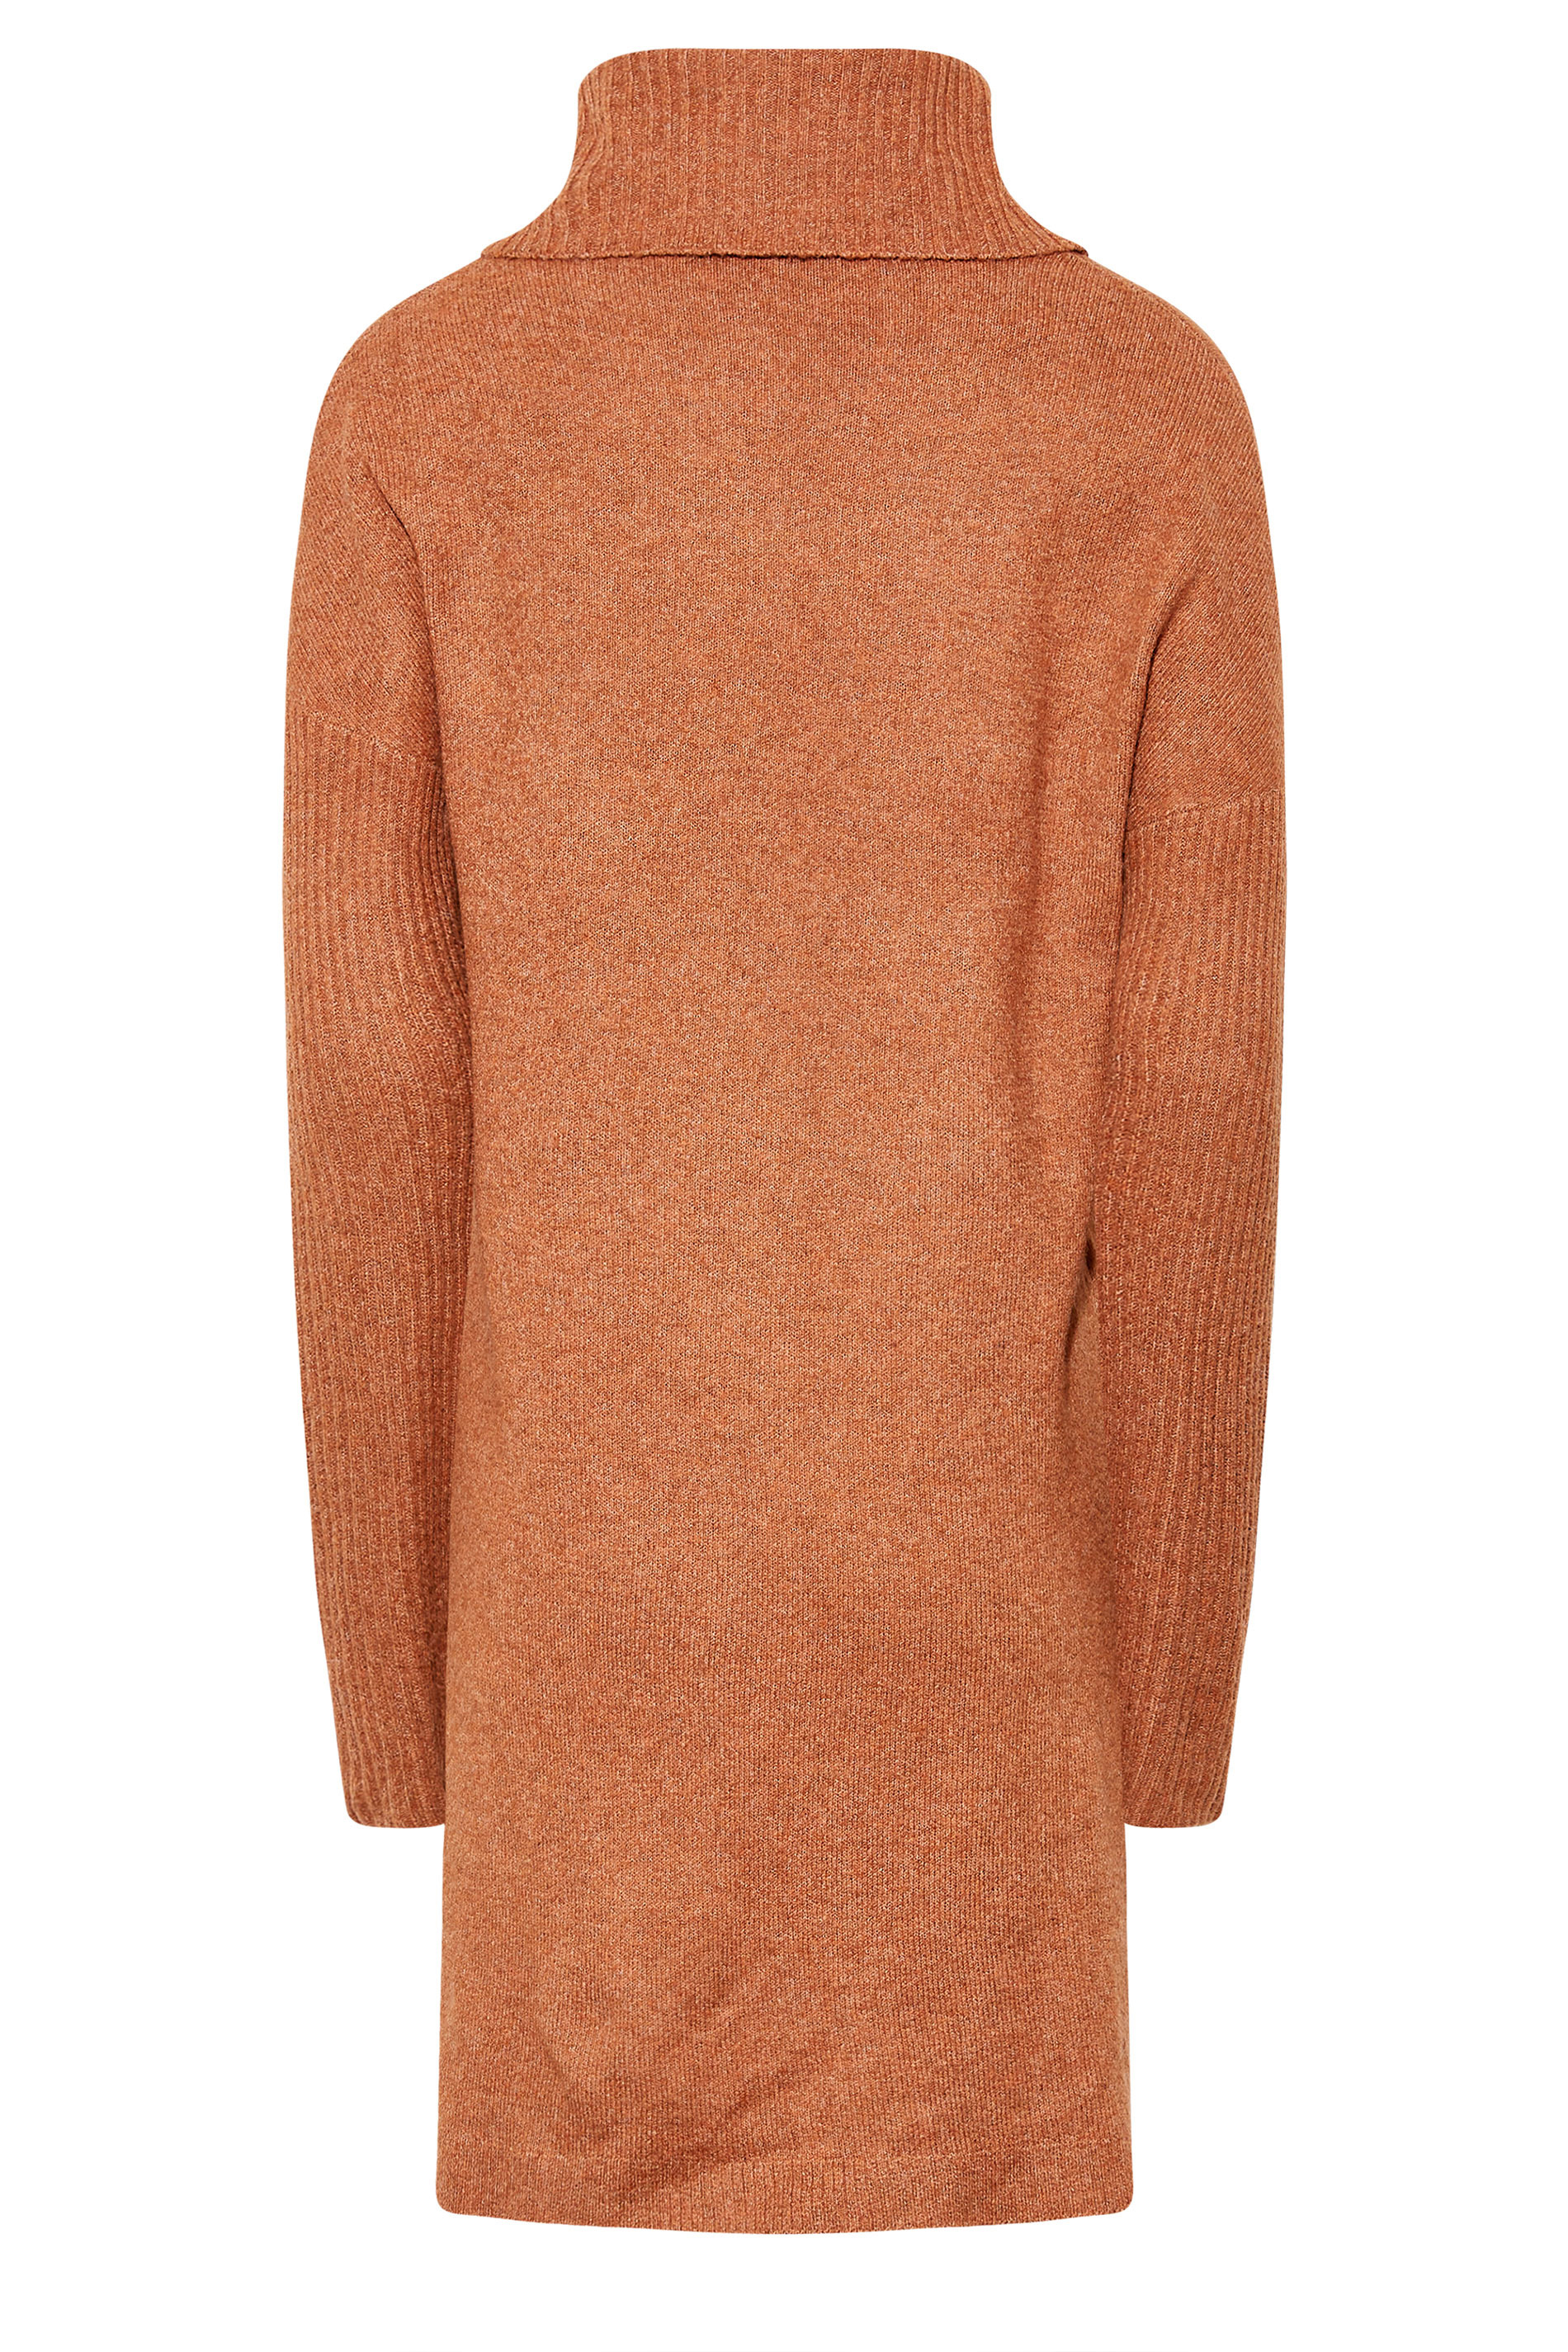 LTS Tall Women's Orange Turtle Neck Knitted Tunic Jumper | Long Tall Sally 3